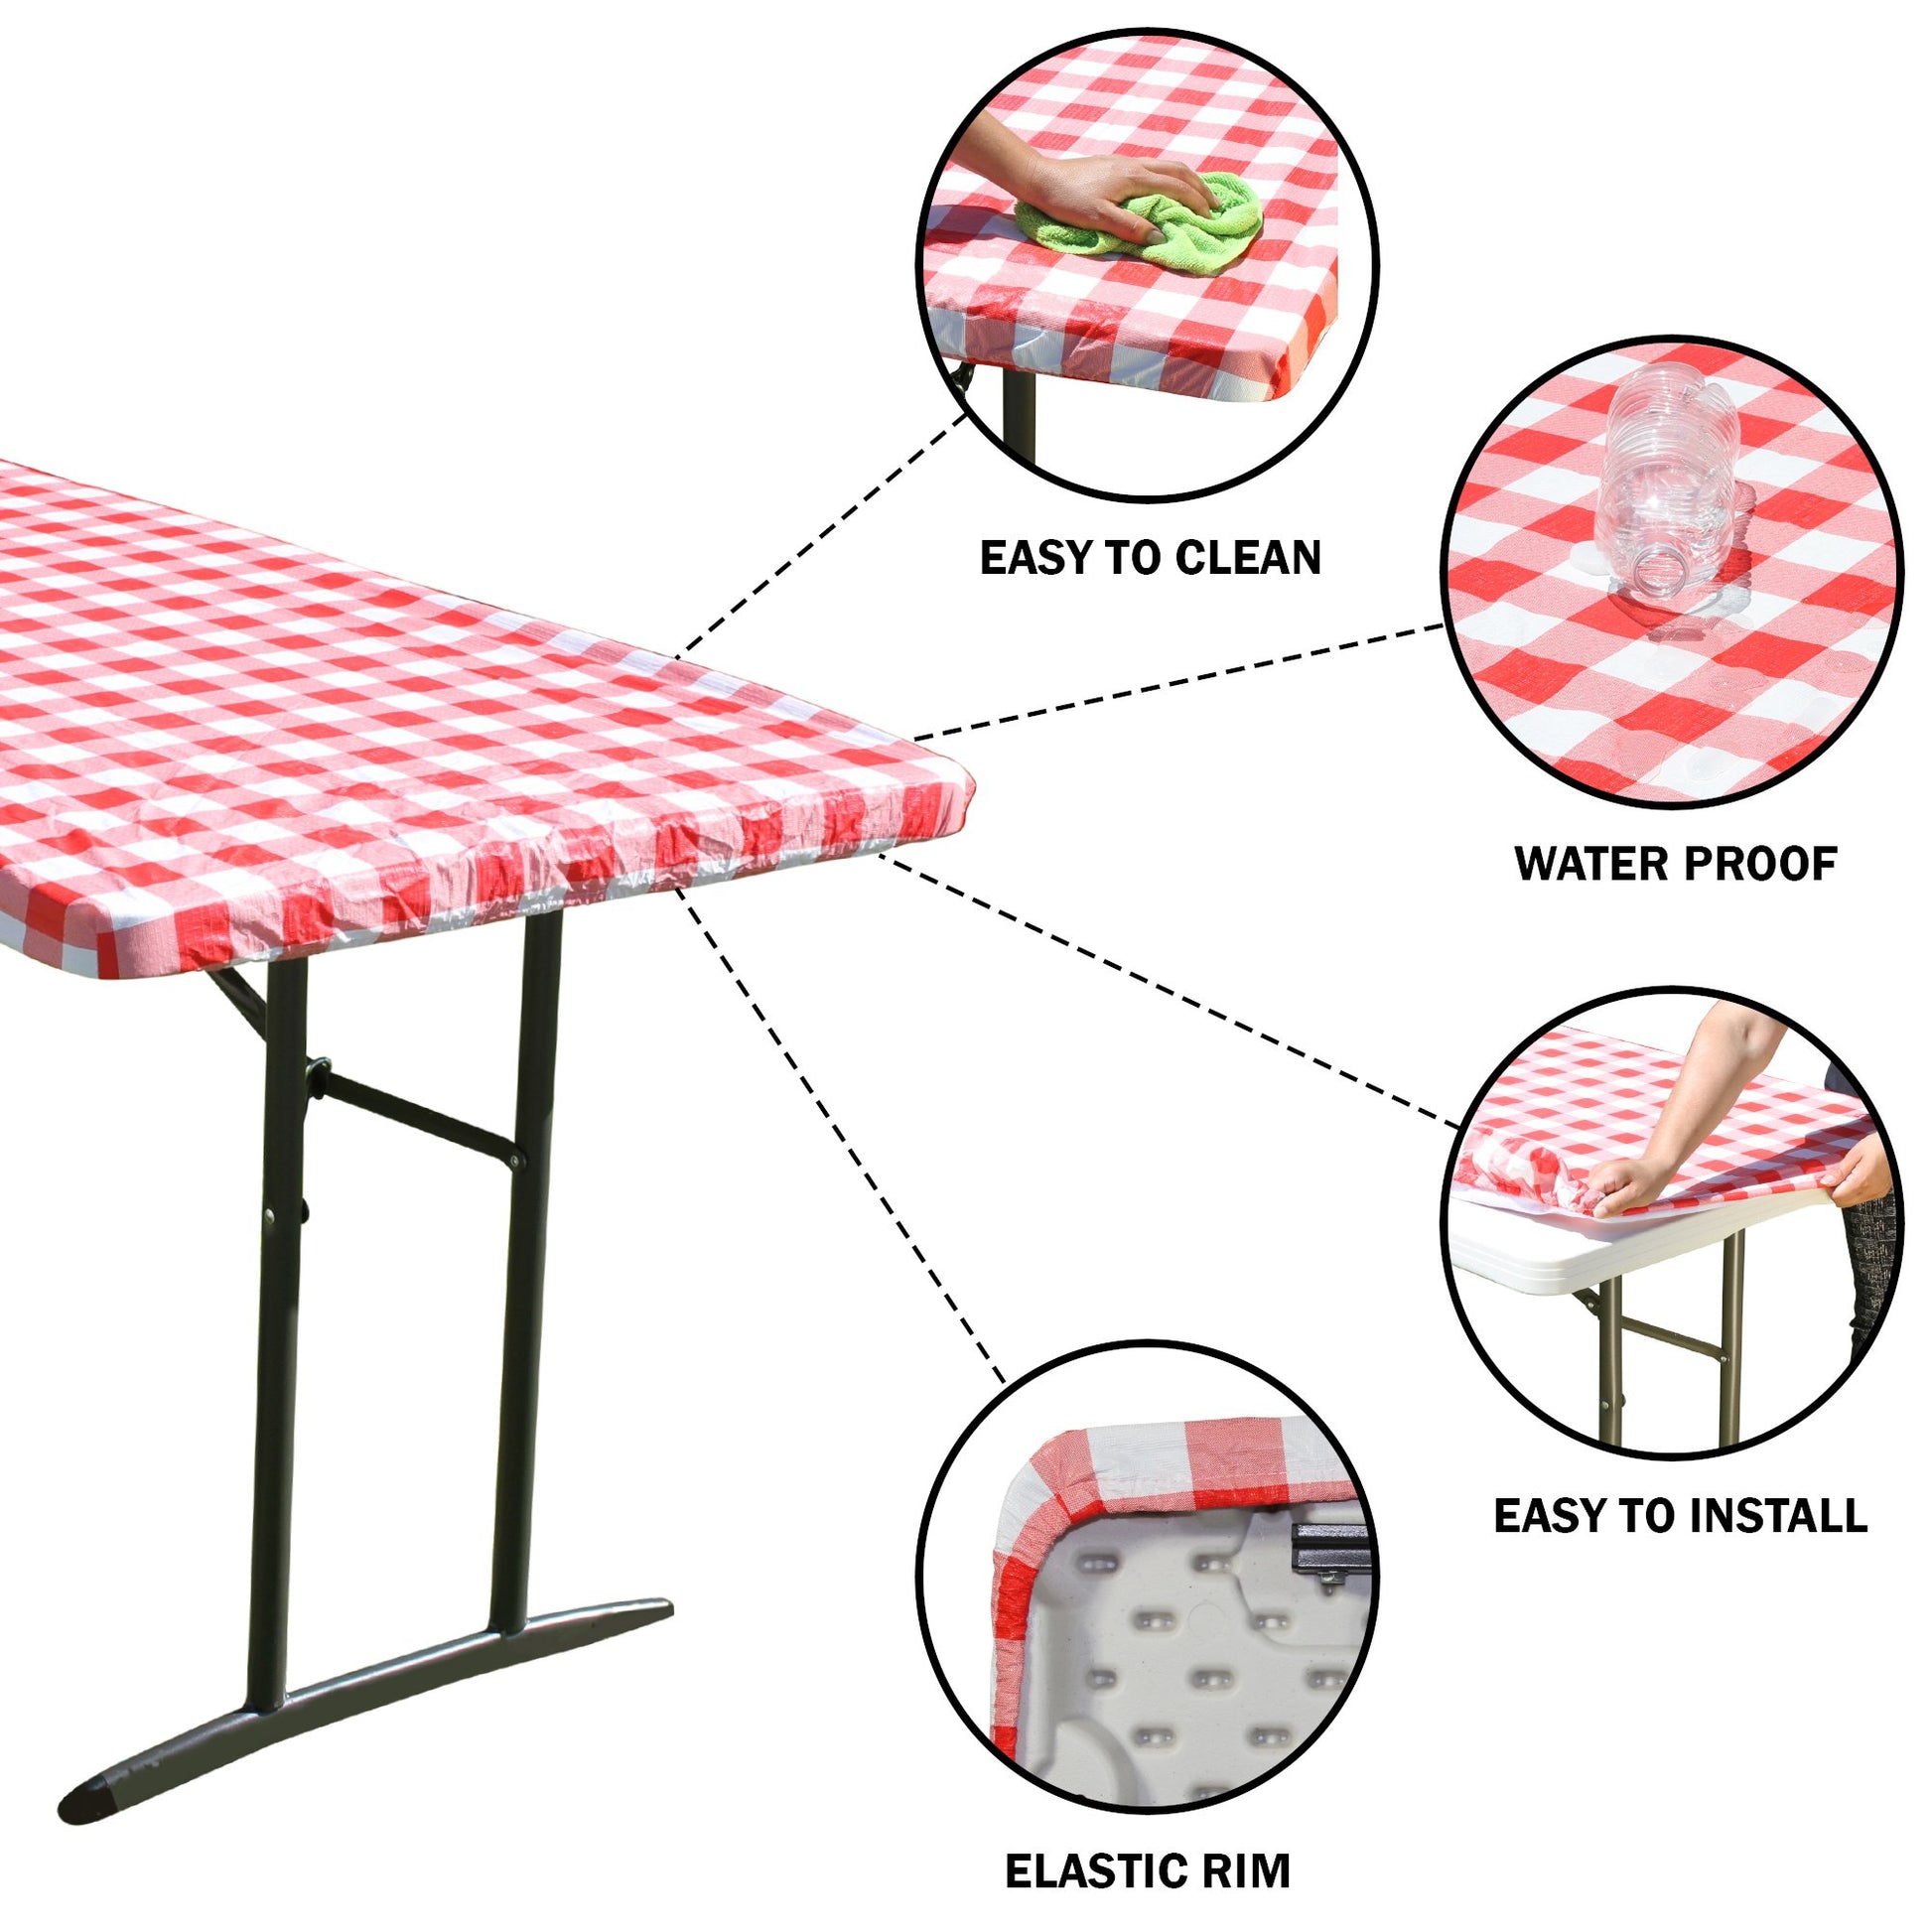 TableCloth PLUS 72" Checkerboard Red and White Fitted Polyester Tablecloth for 6' Folding Tables is easy to clean, water proof, easy to install, and has an elastic rim